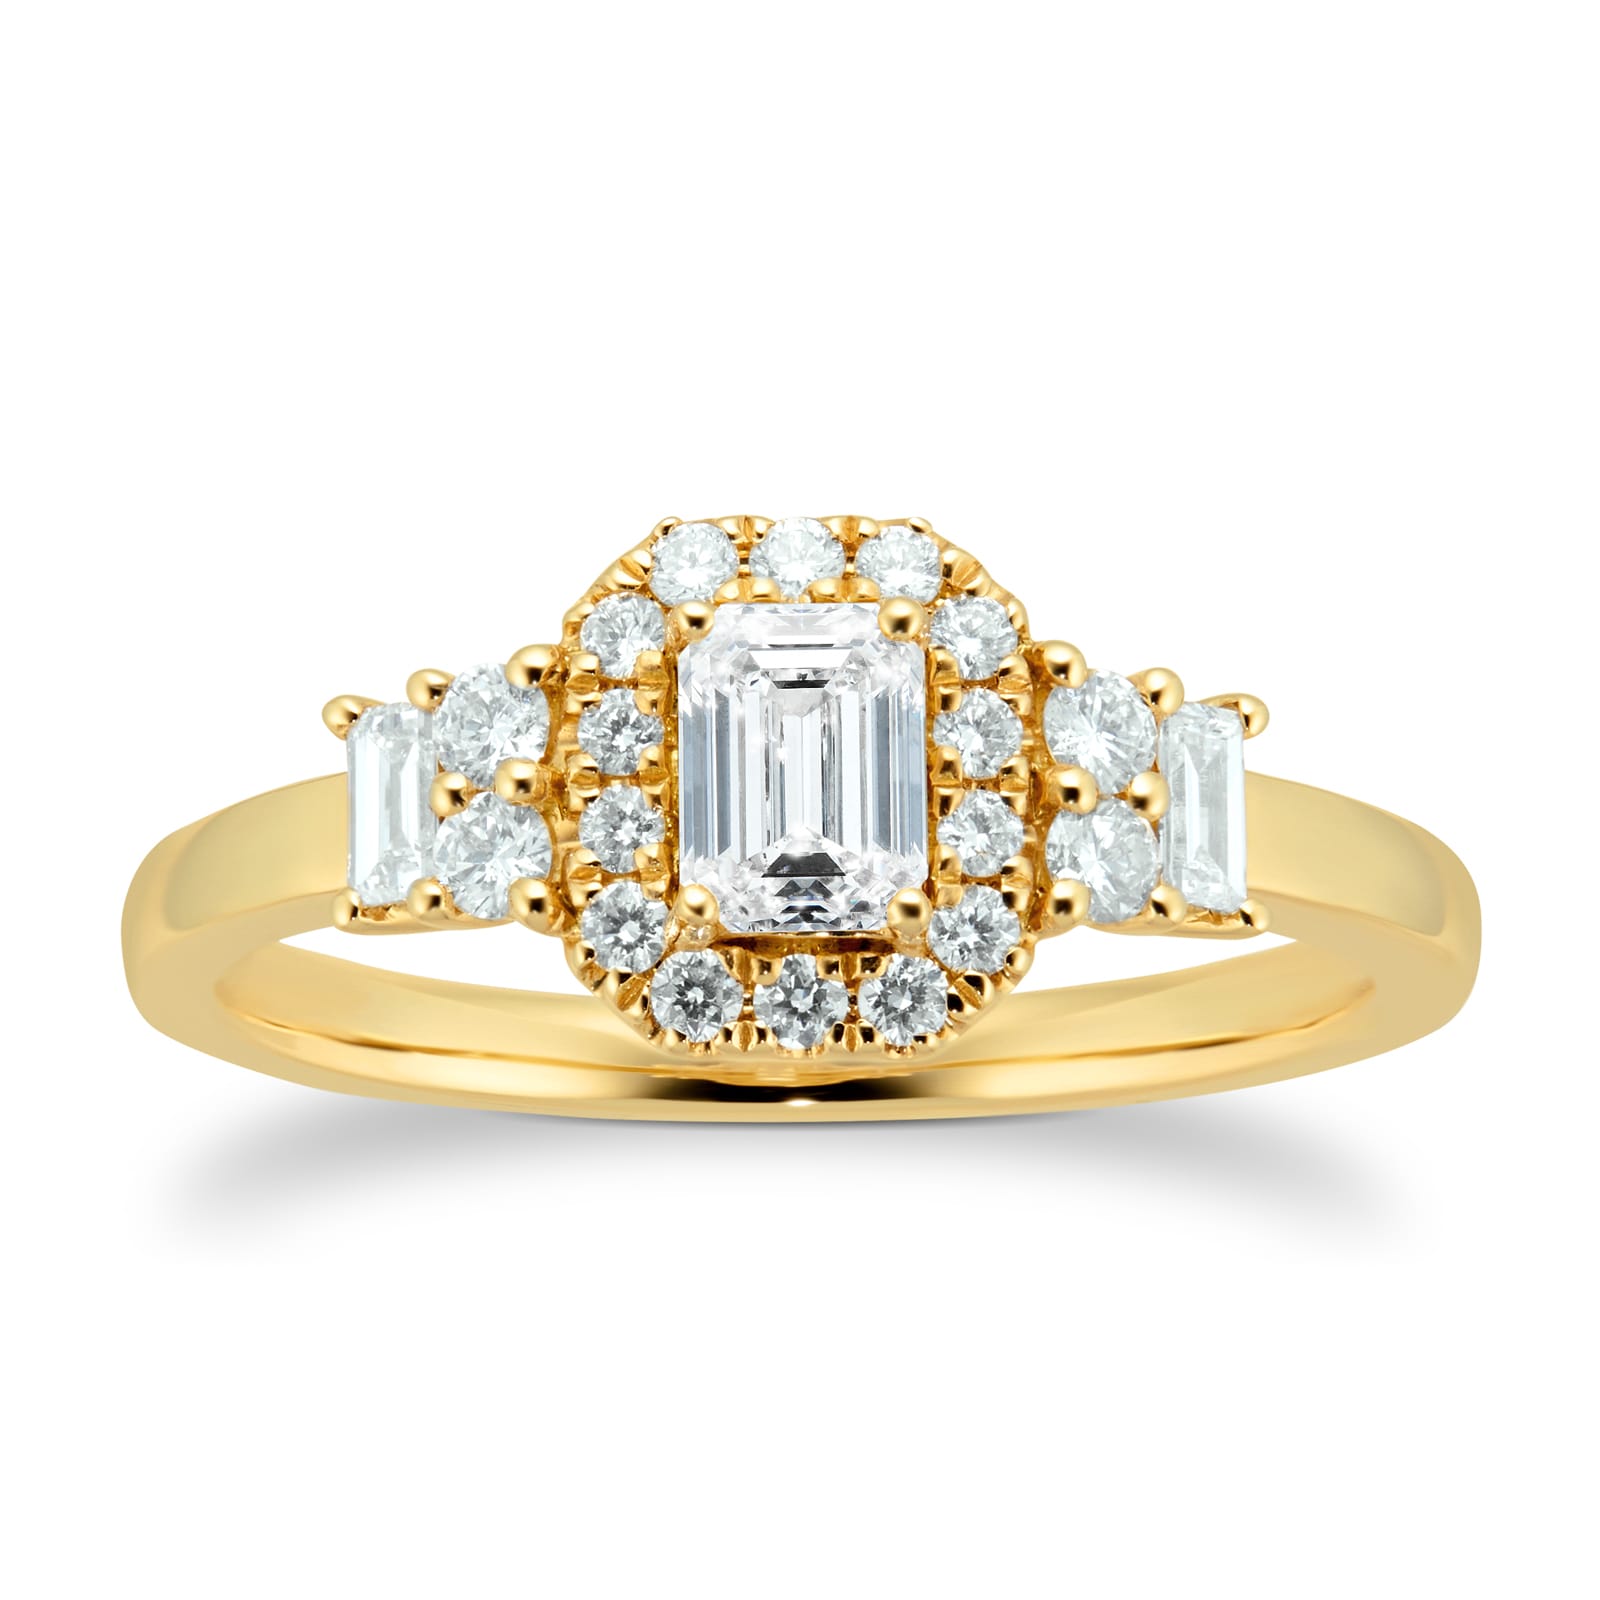 18ct Yellow Gold 0.75cttw Diamond Emerald Cut Halo Ring - Ring Size I